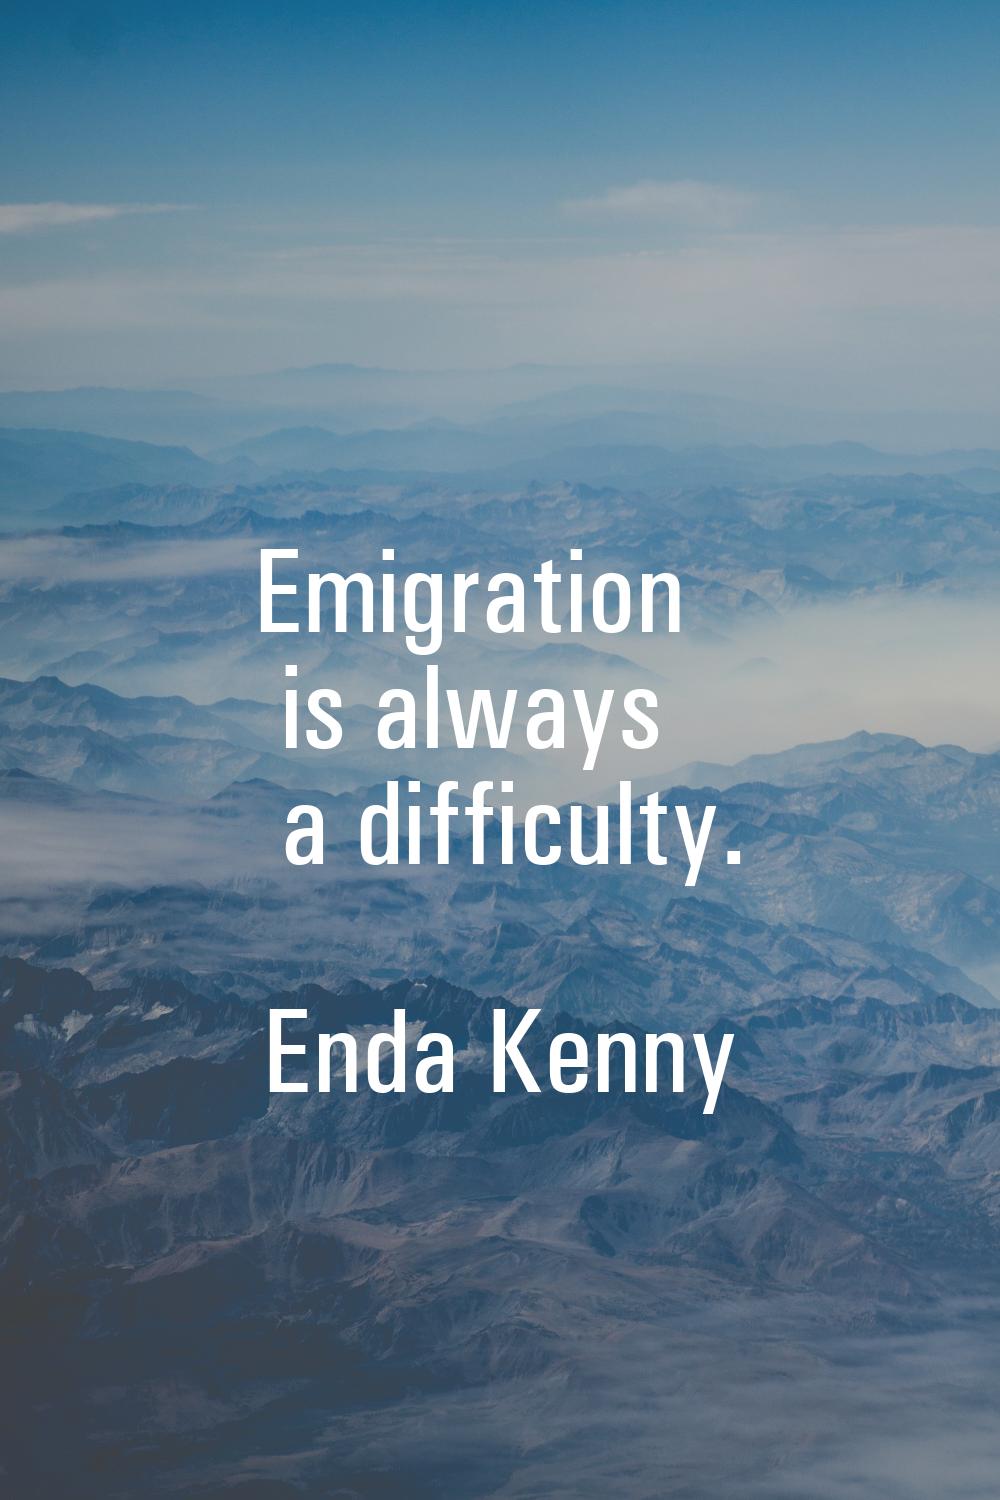 Emigration is always a difficulty.